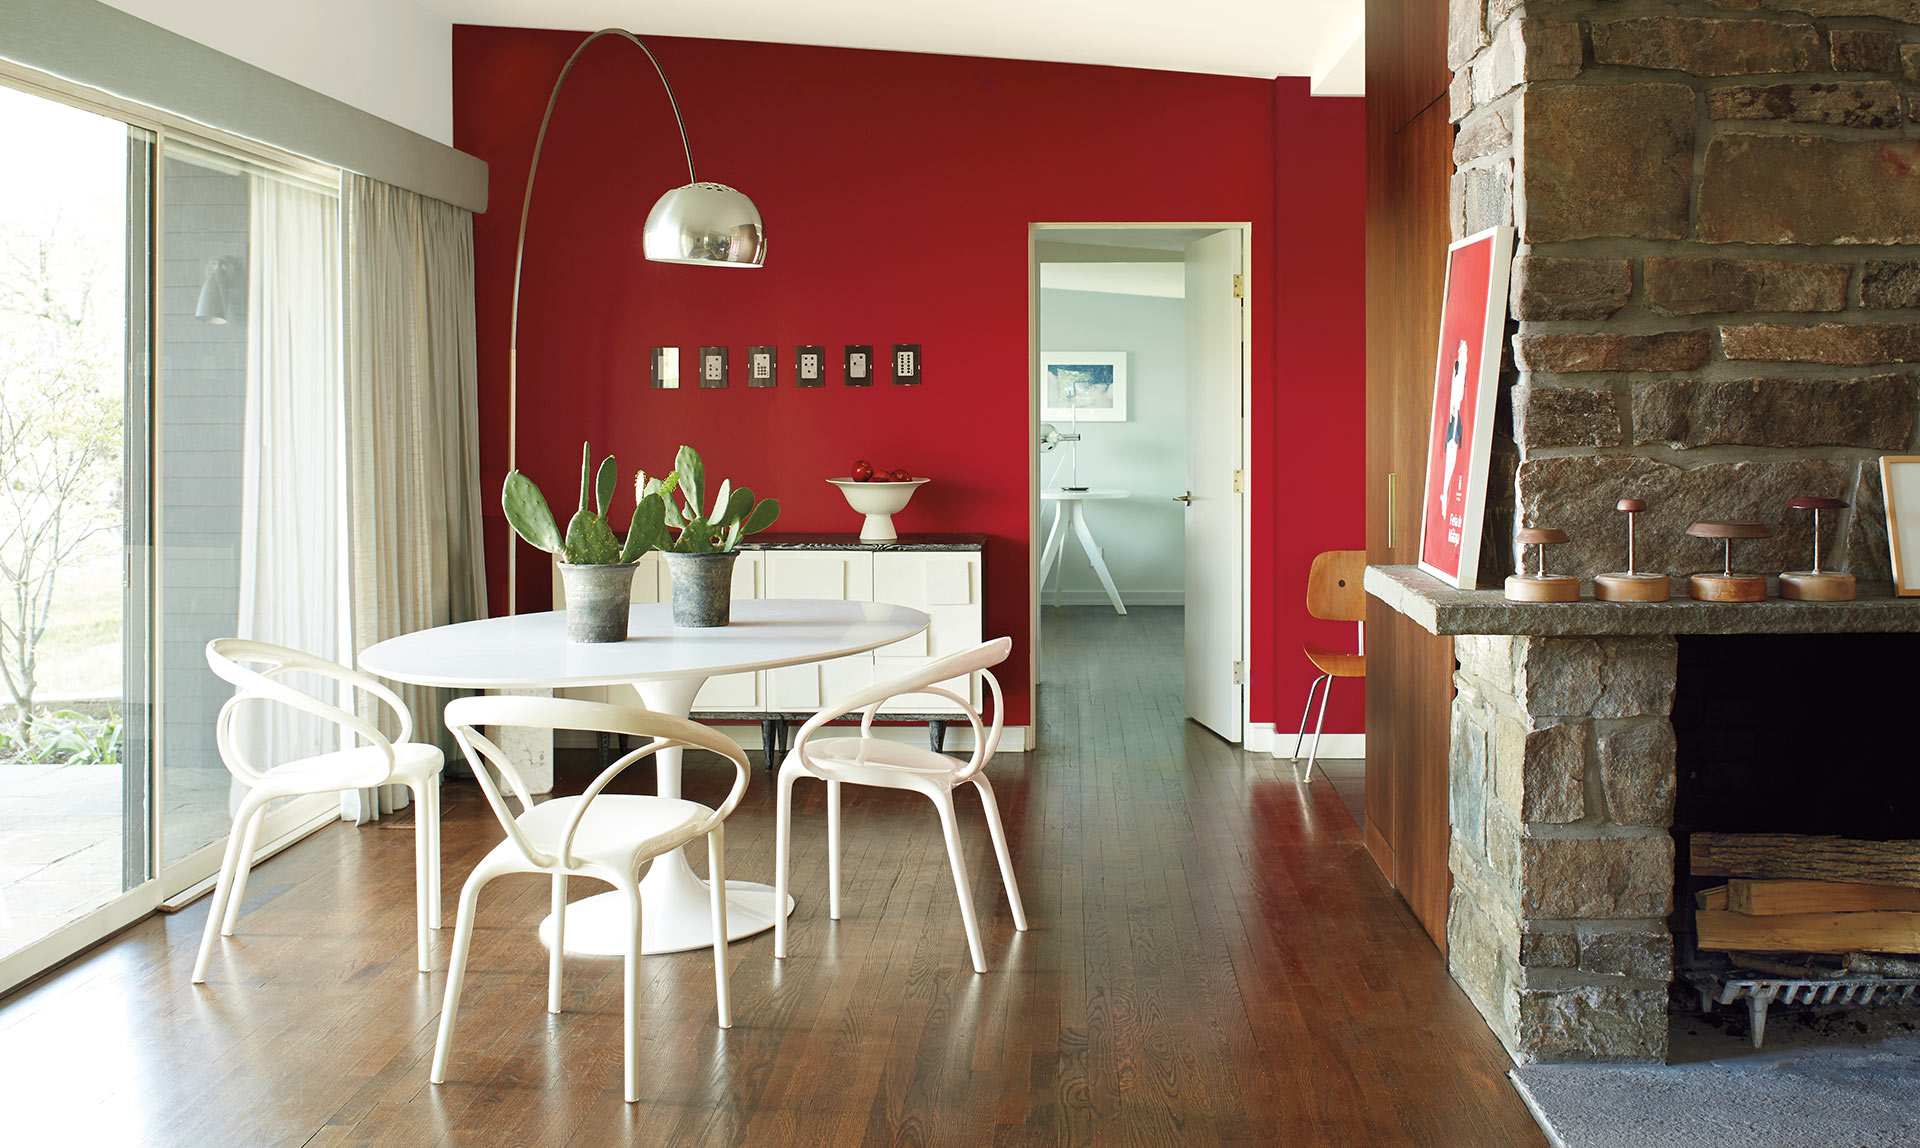 Modern dining room design with bright red accent wall.